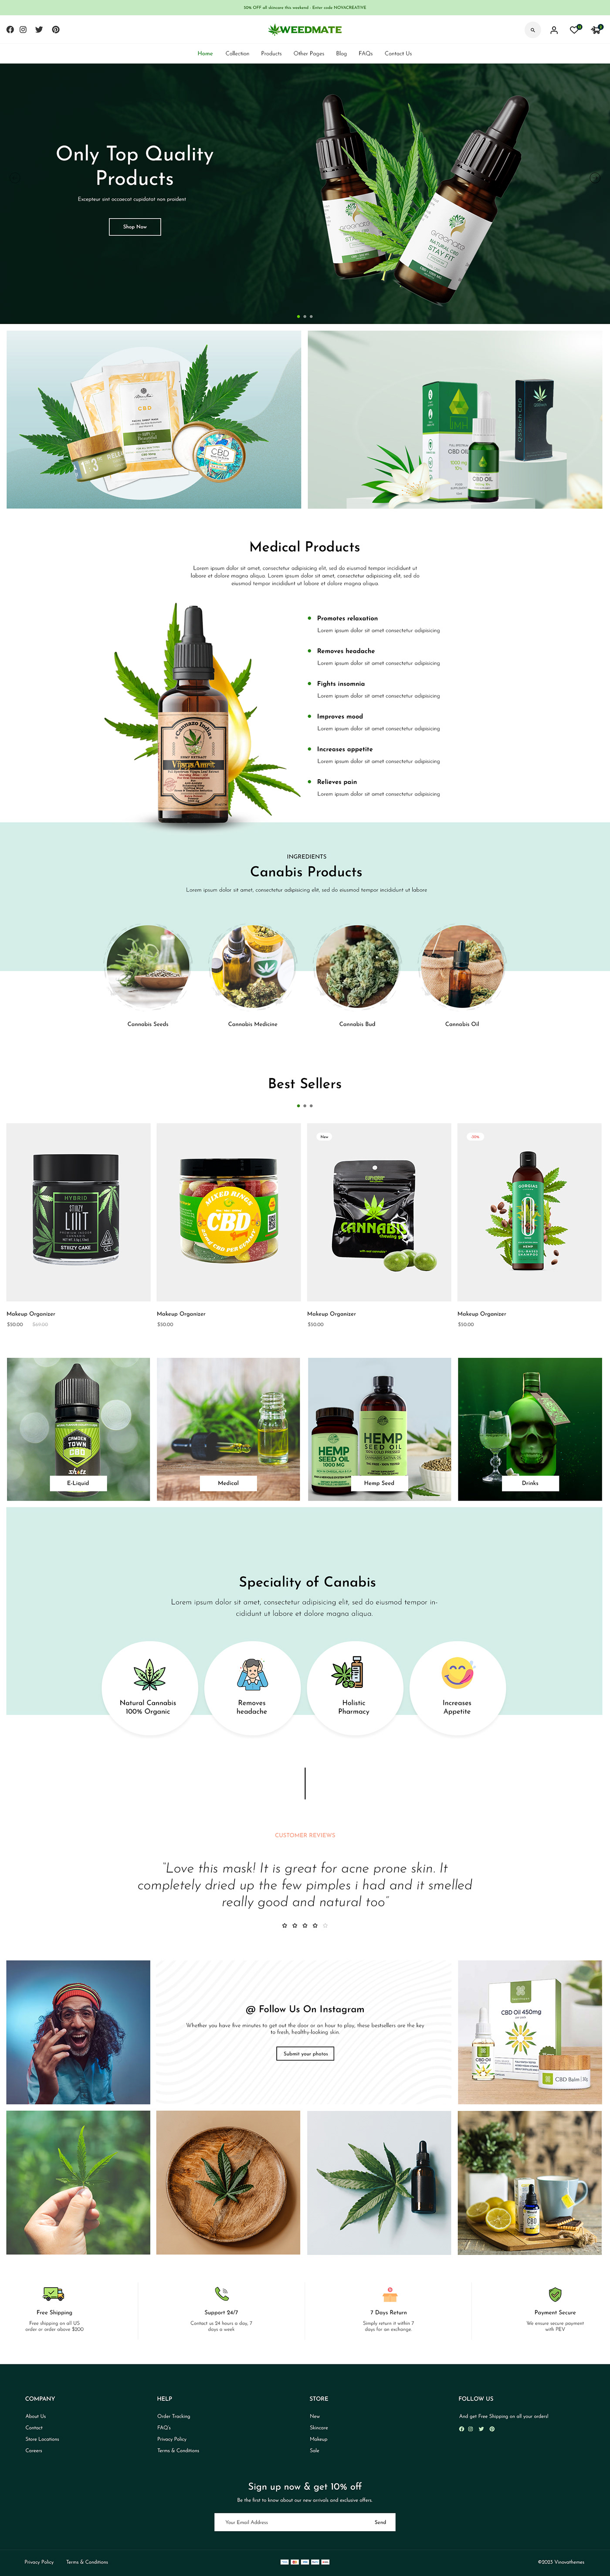 Shopify dropshipping store Shopify Design Website landing page wordpress Website Design Cannabis Website shopify experts